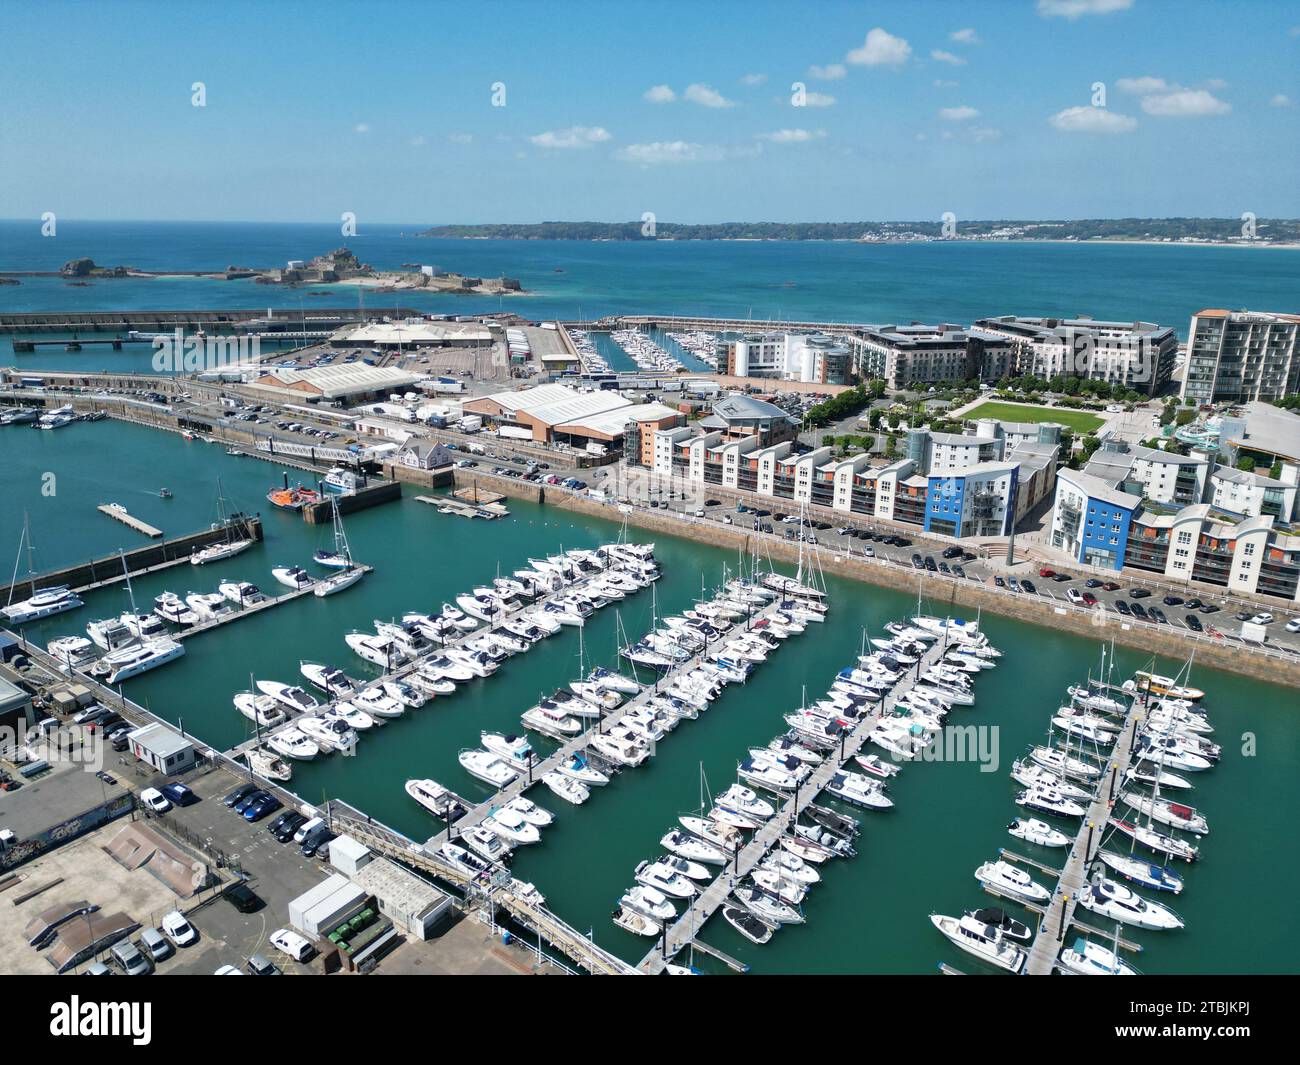 St Helier Harbour, Jersey Channel Islands, aereo con droni Foto Stock